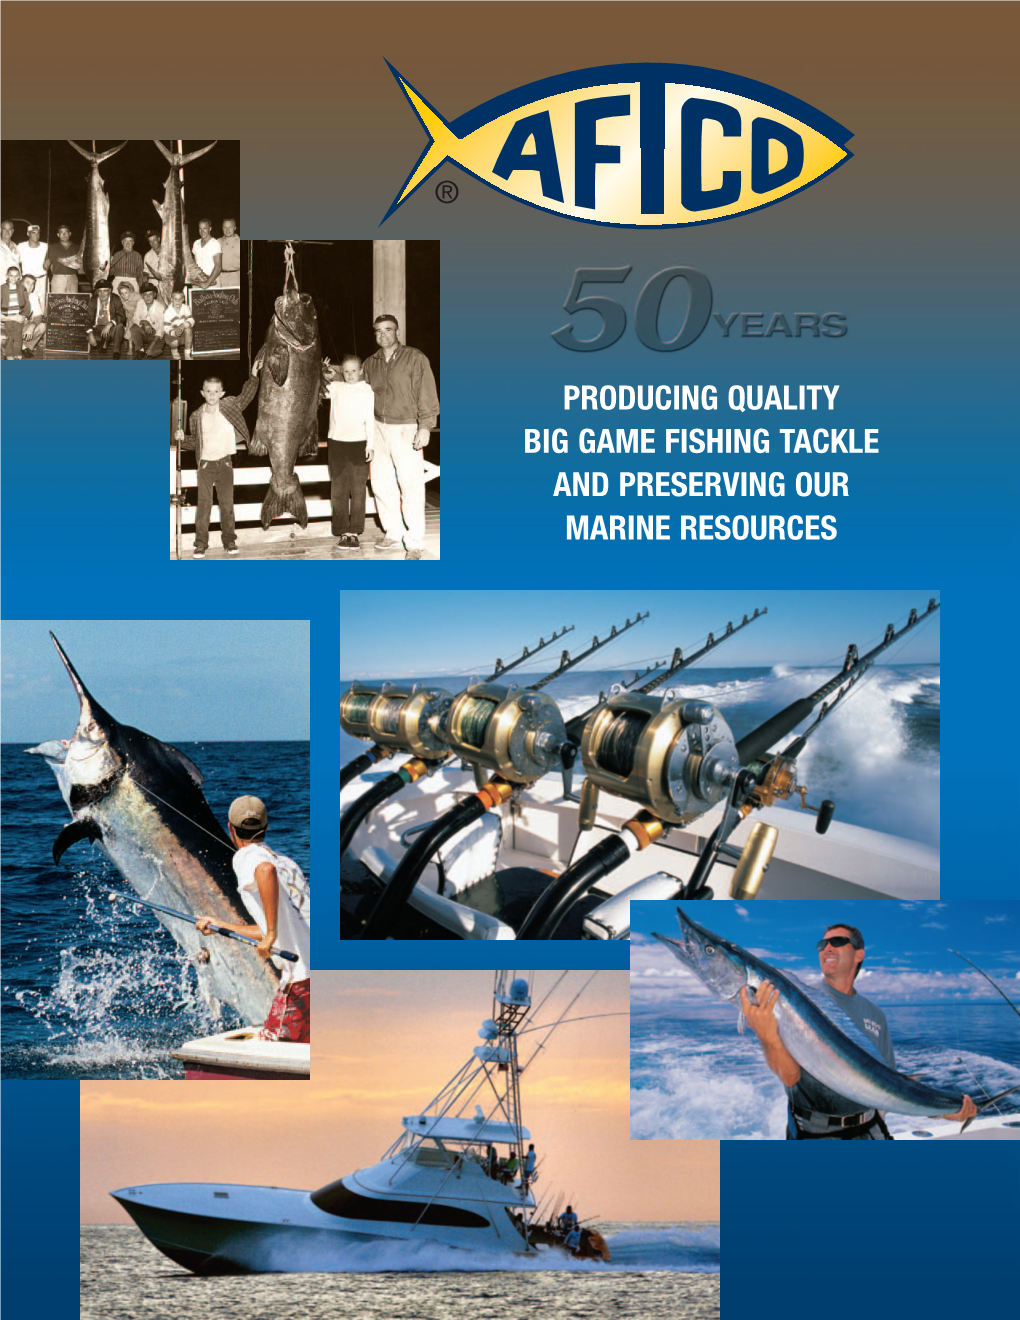 PRODUCING QUALITY BIG GAME FISHING TACKLE and PRESERVING OUR MARINE RESOURCES • High Performance Big Game Fishing Tackle